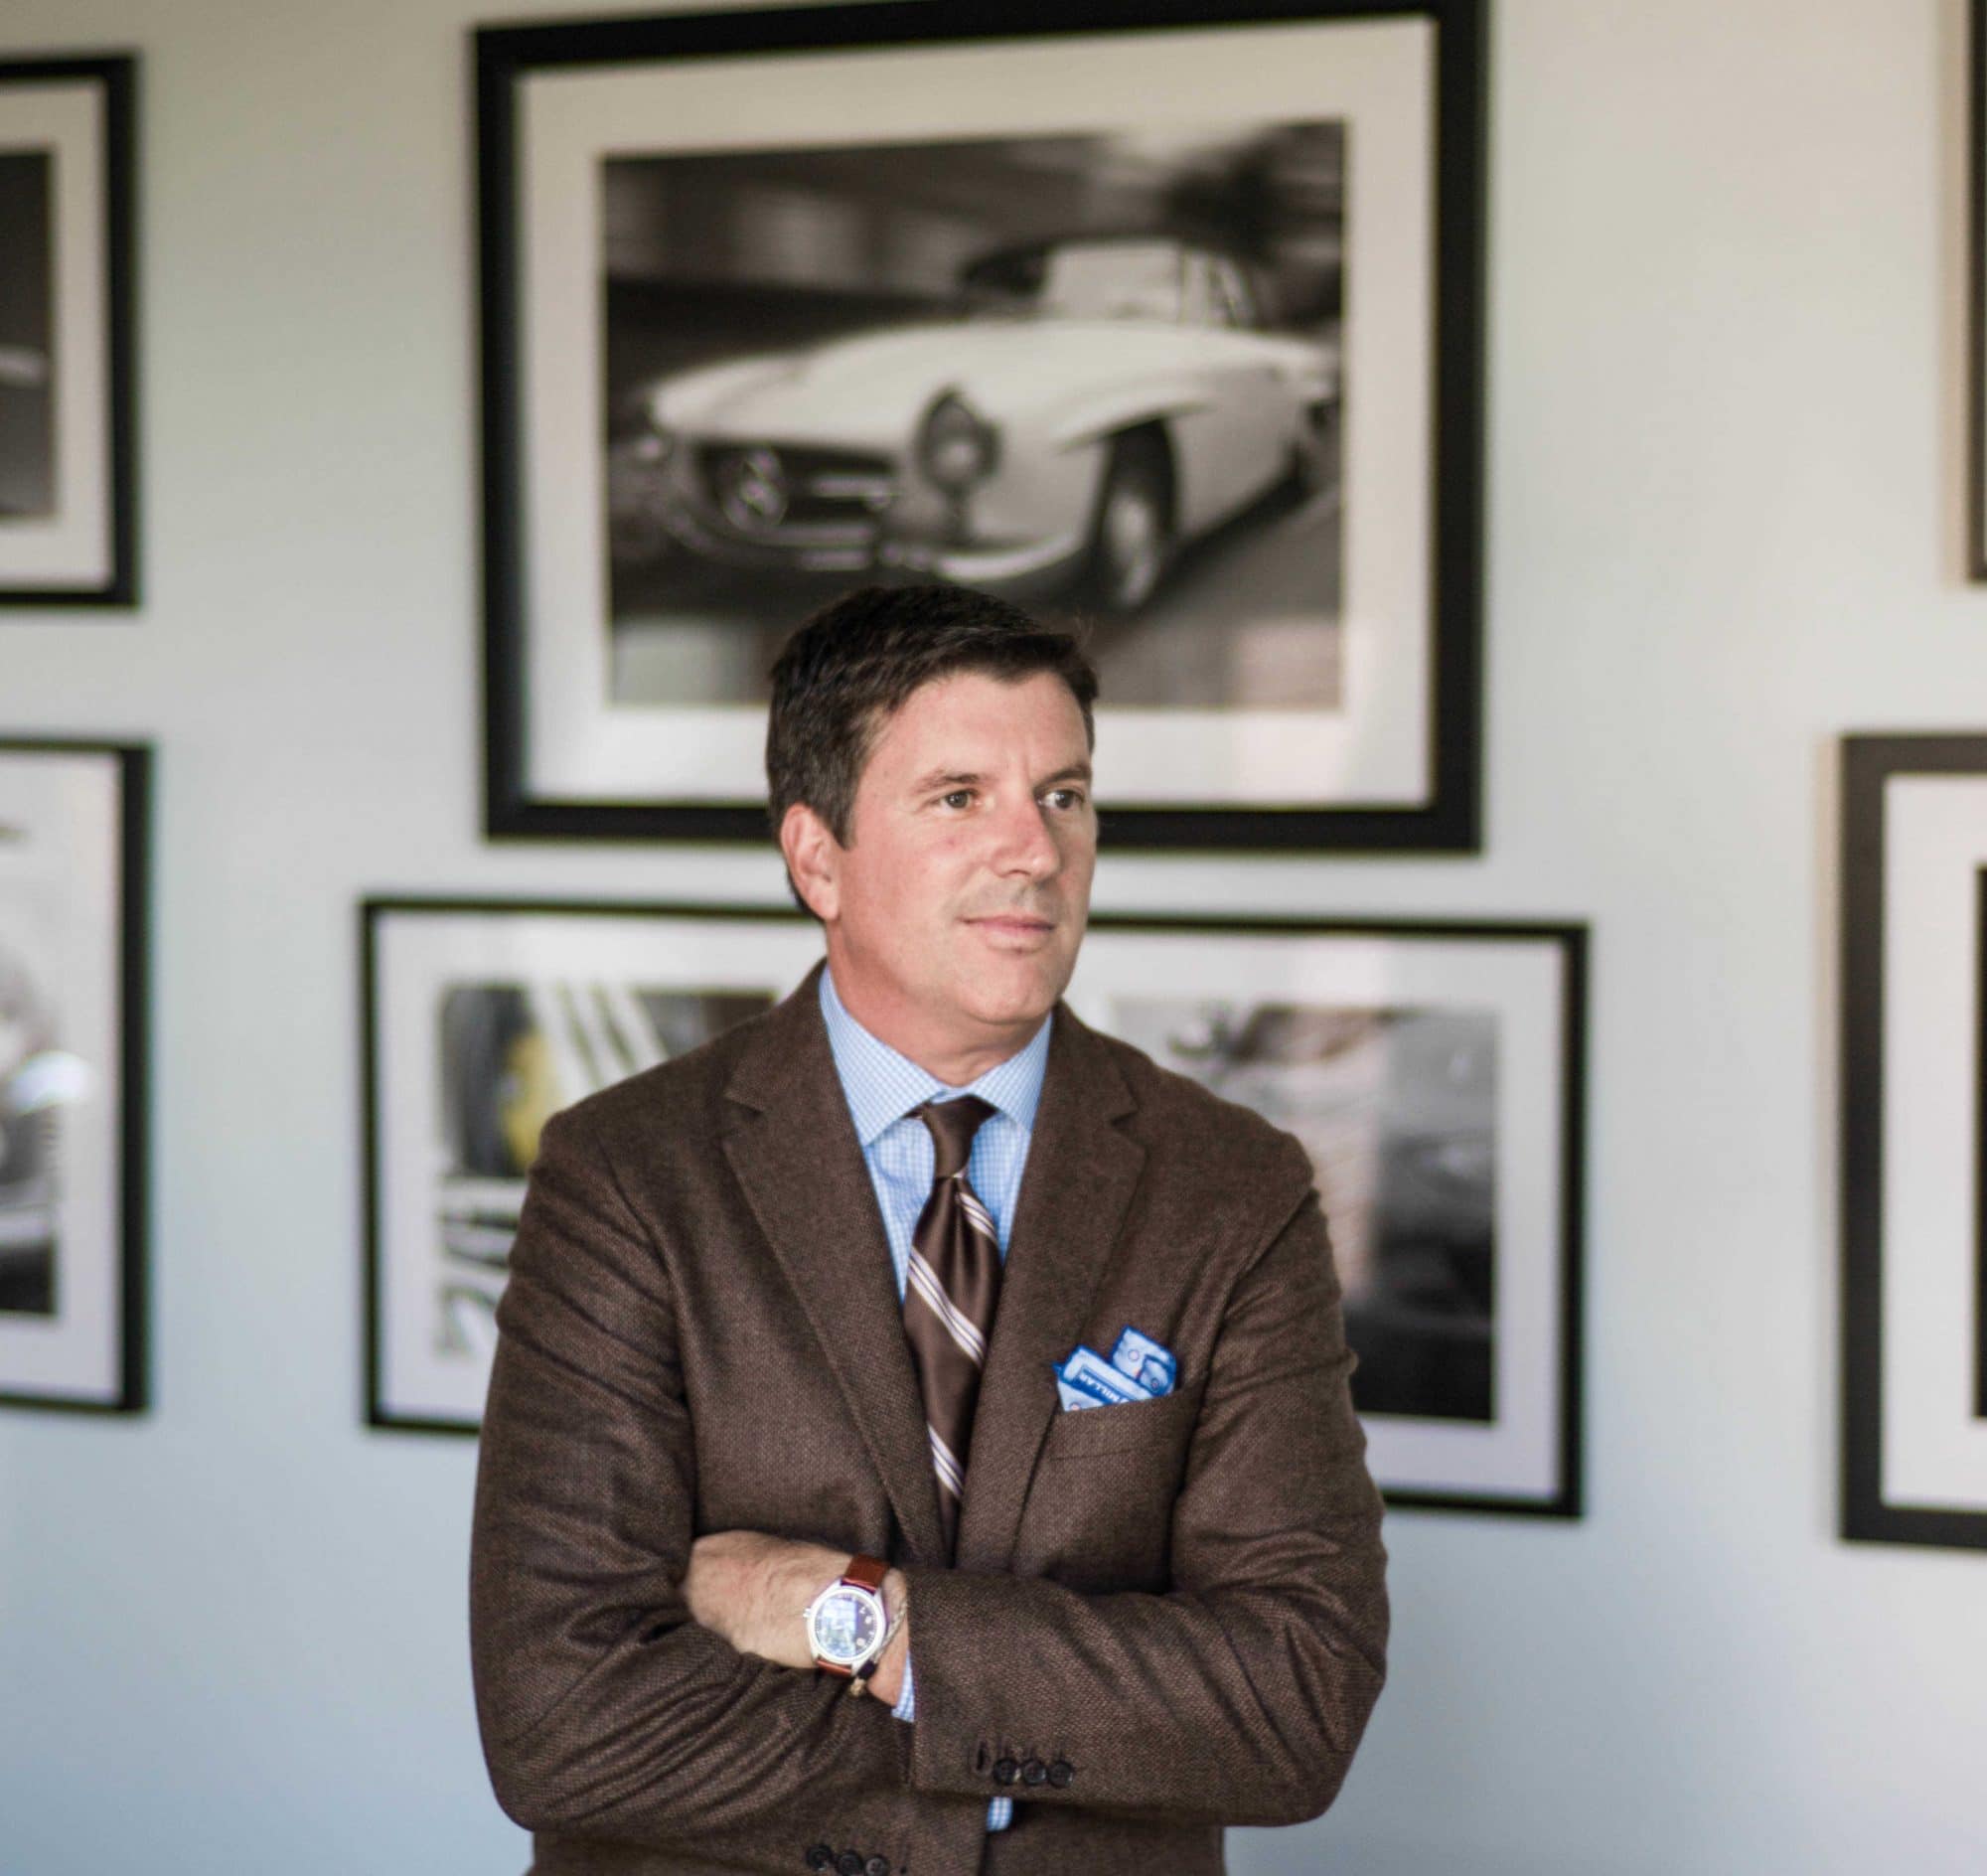 From golf to great: Raleigh's Peter Millar goes global - WALTER Magazine